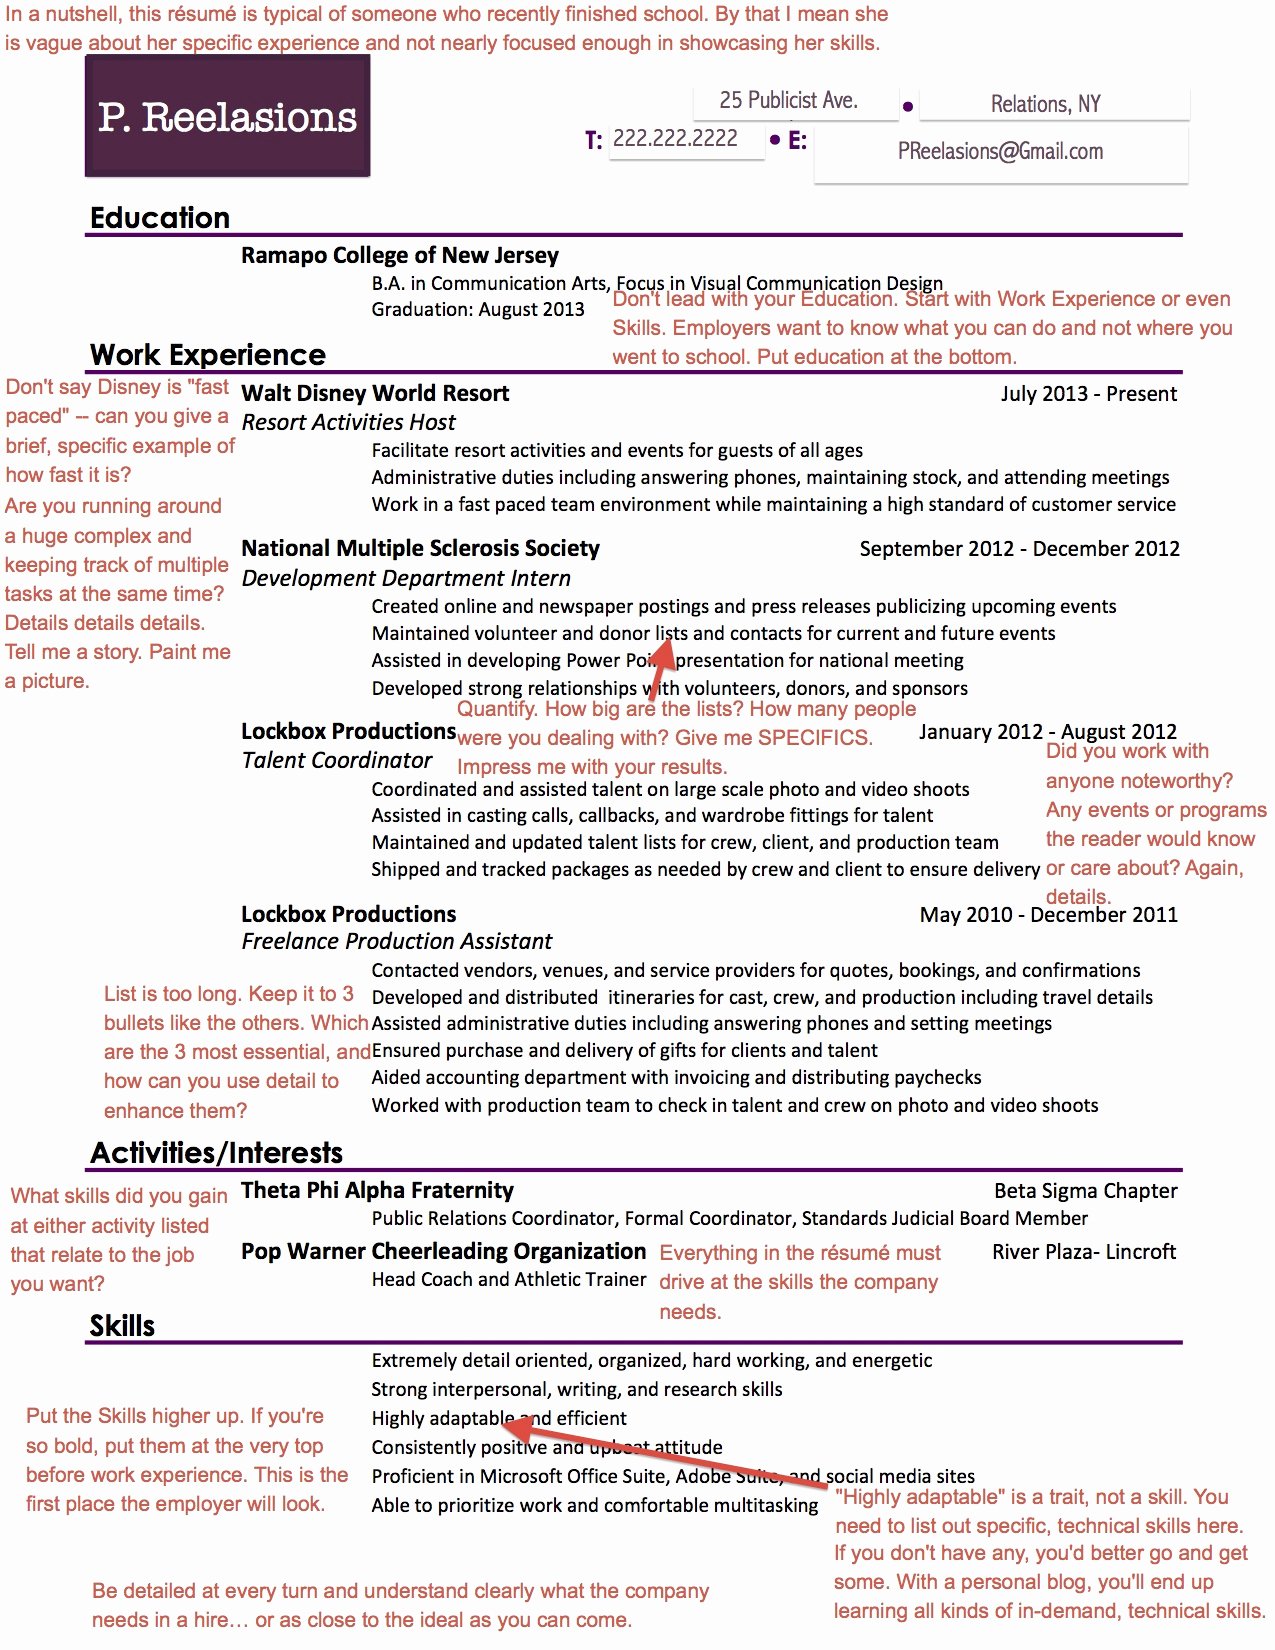 What Employers are Looking for Your Pr Résumé